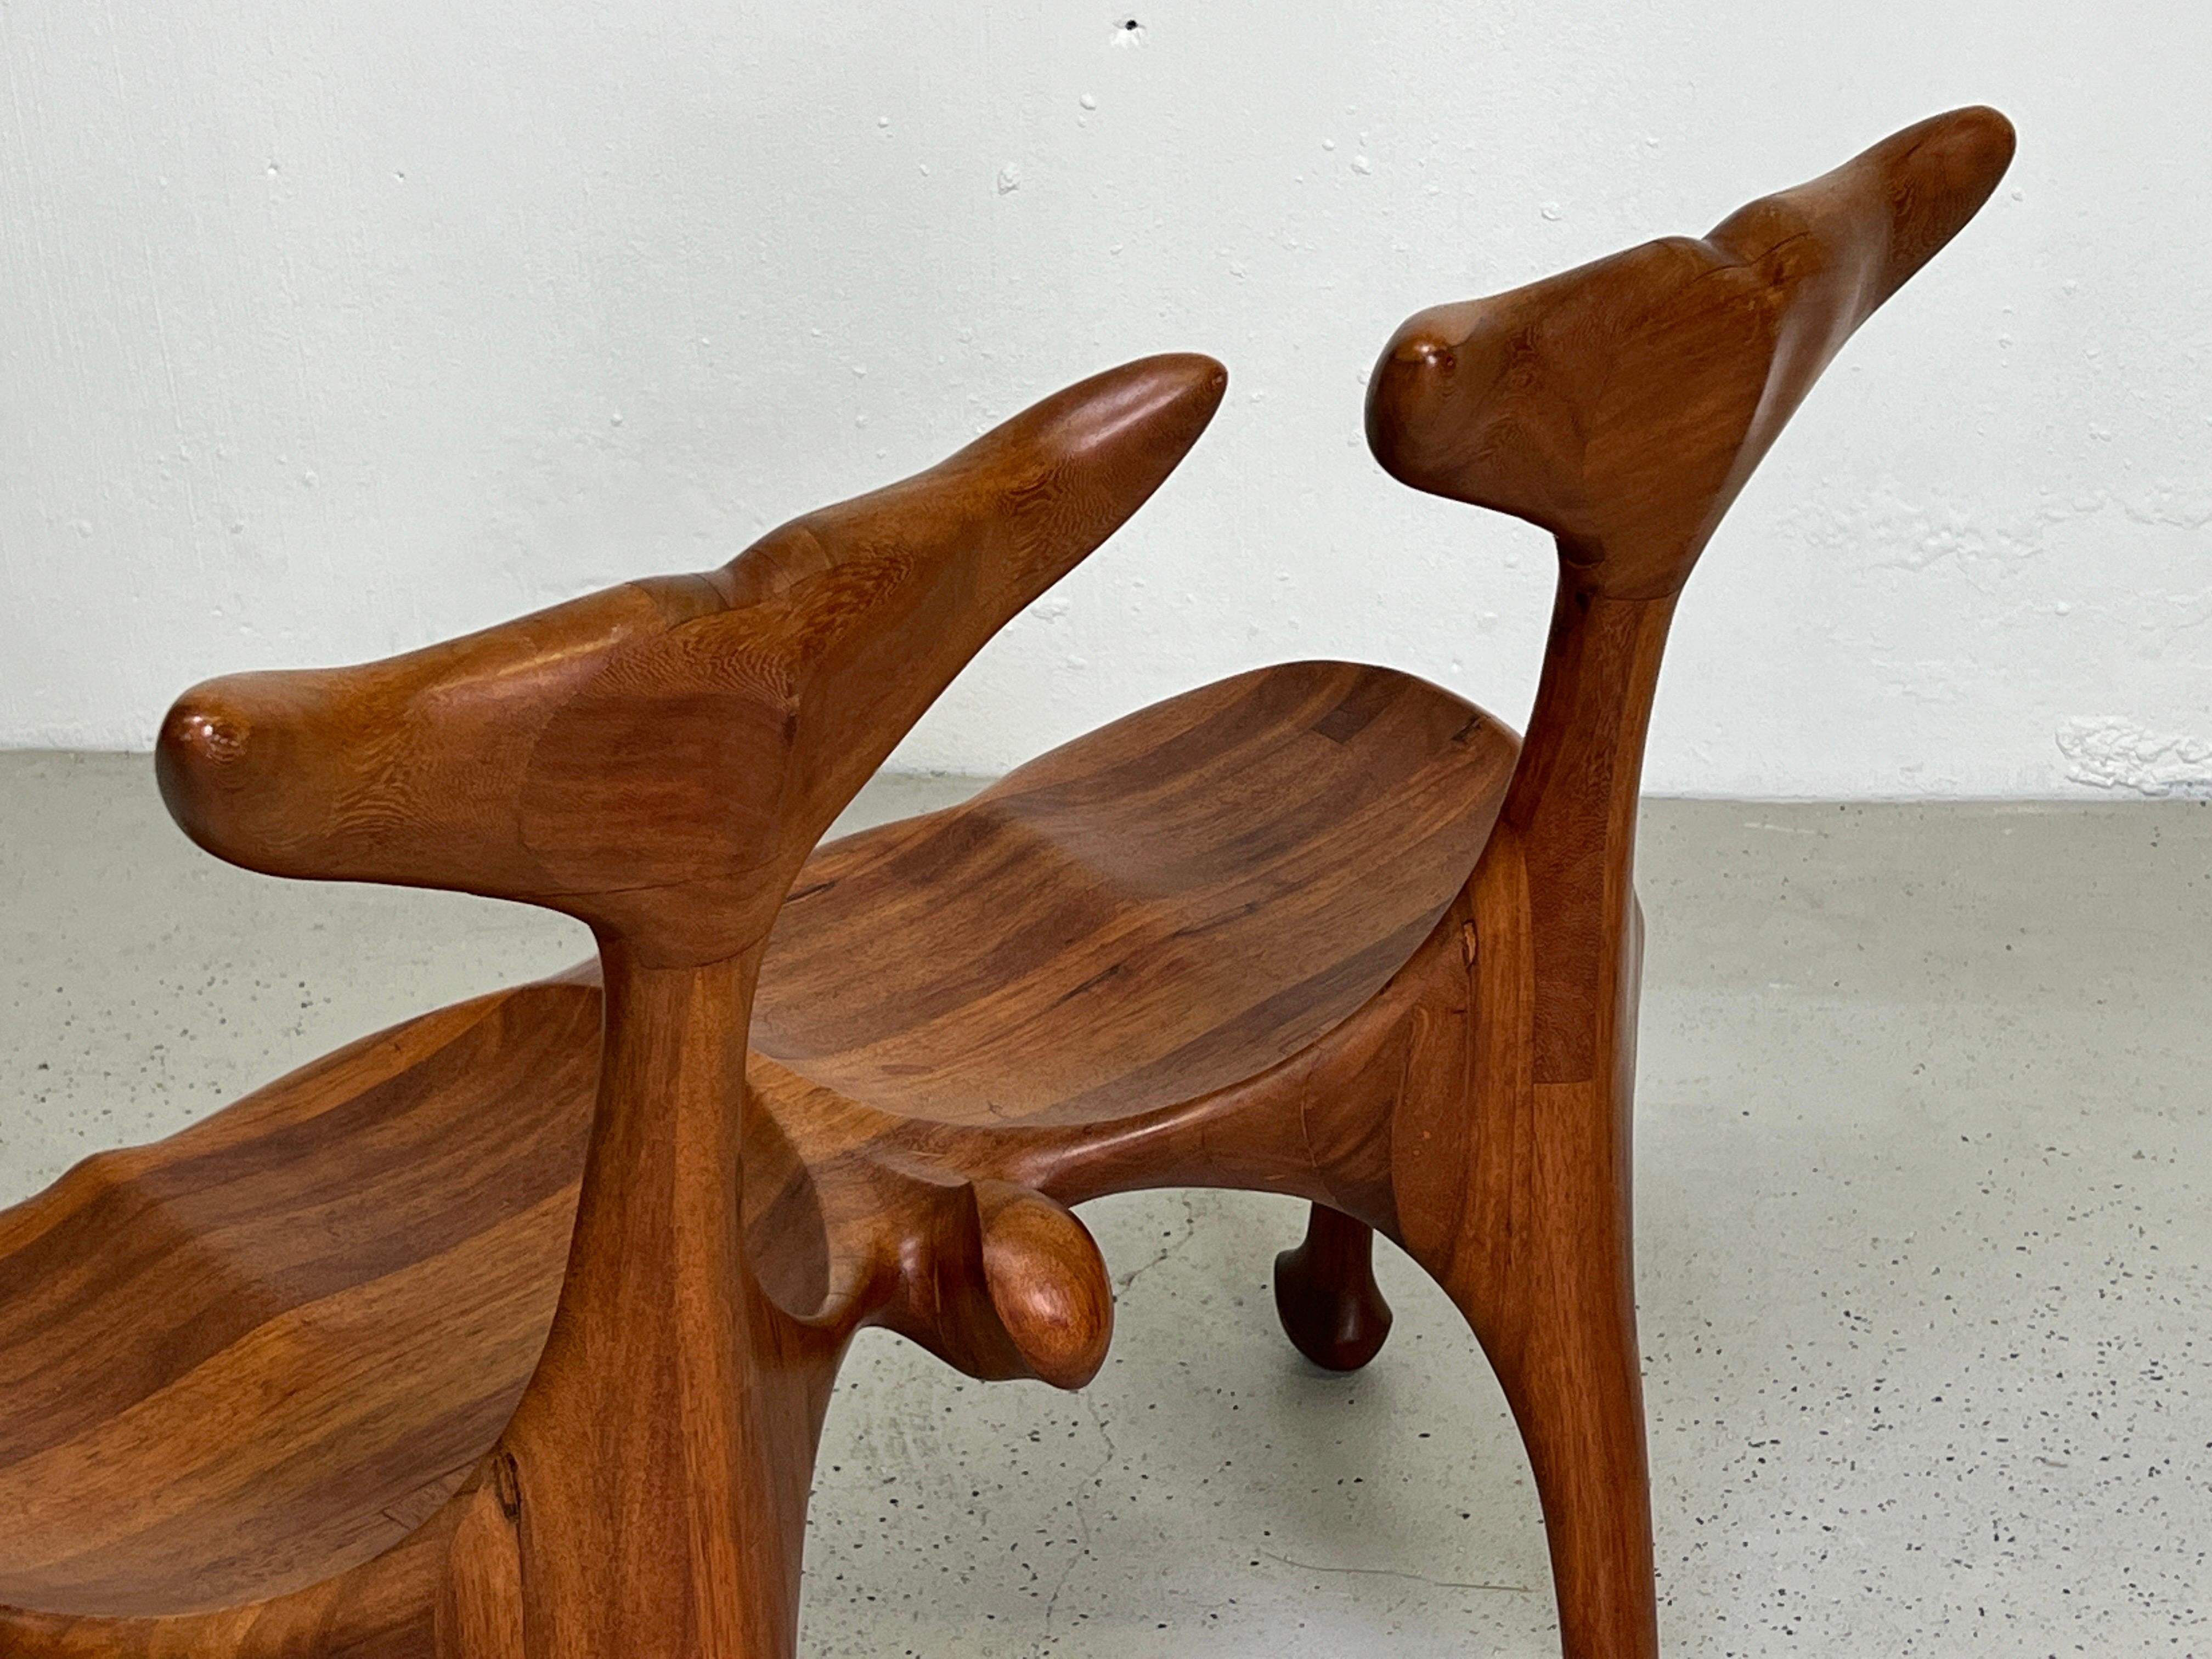 Larry Hunter Studio Craft 'Whale Tail' Bench 6